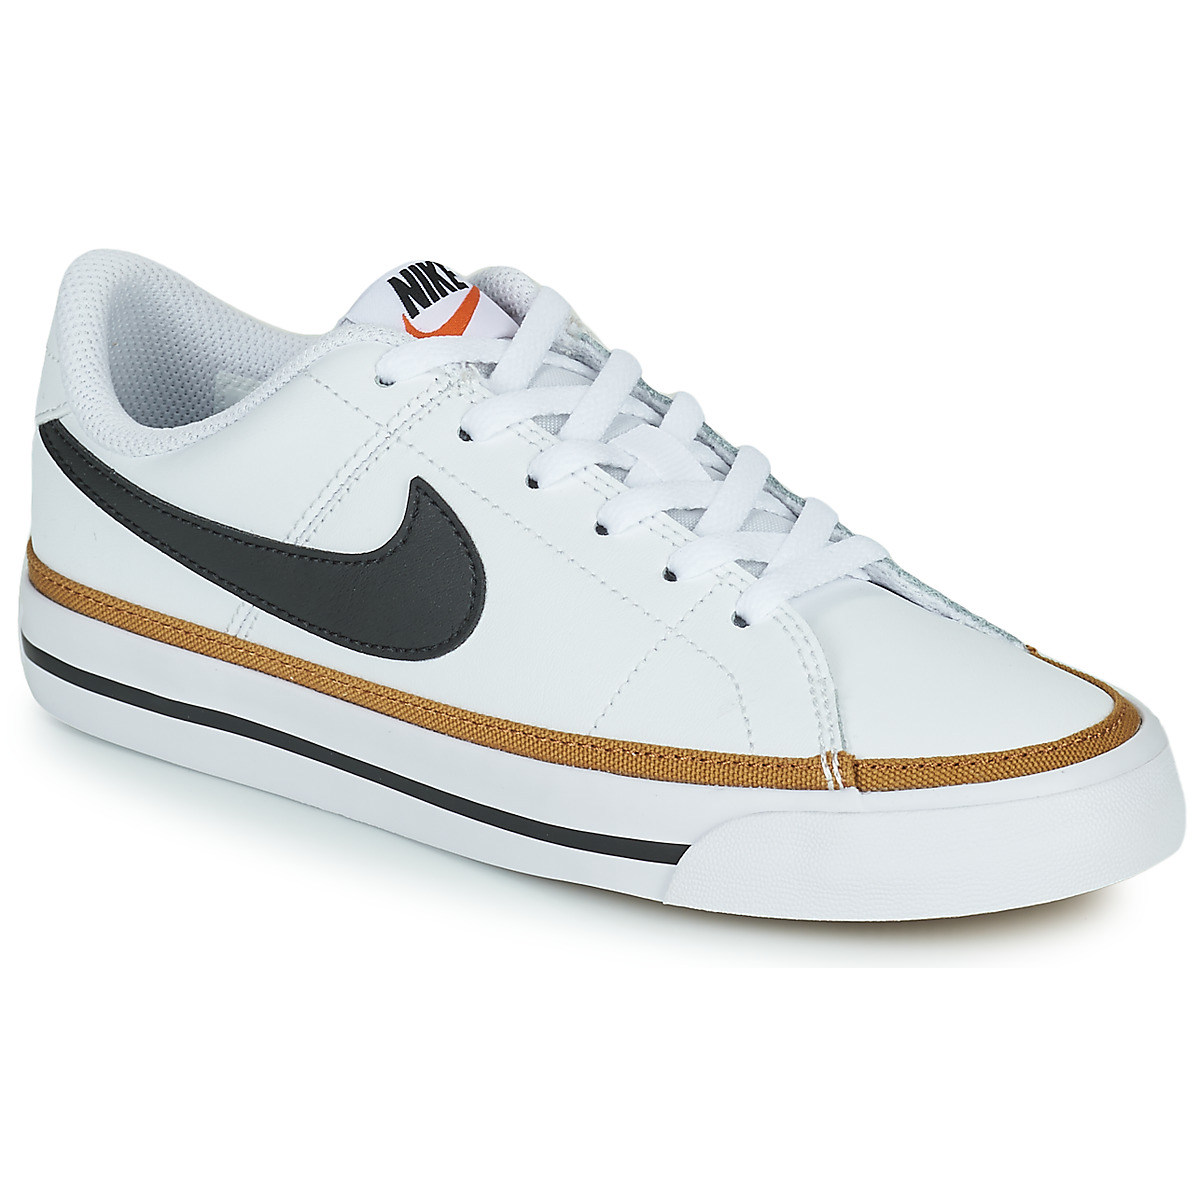 Nike NIKE COURT LEGACY ! - trainers NET Black Shoes Free - White Child delivery | Spartoo Low / top